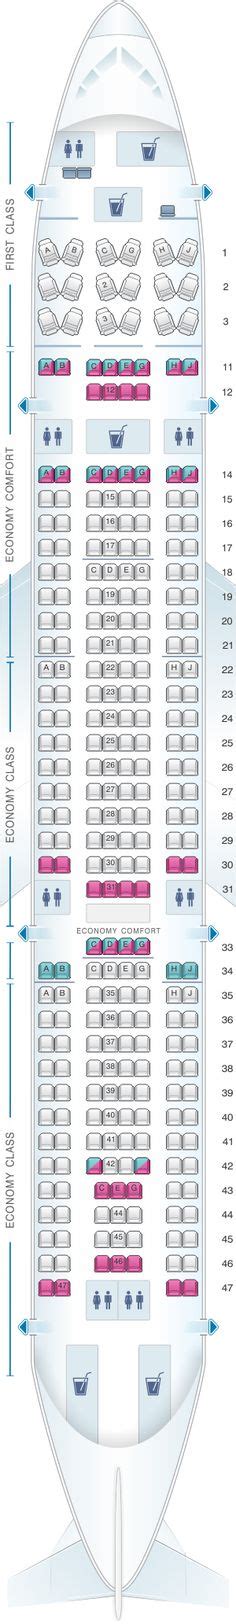 Seat Map Hawaiian Airlines Airbus A330 200 Retrofitted Air Transat